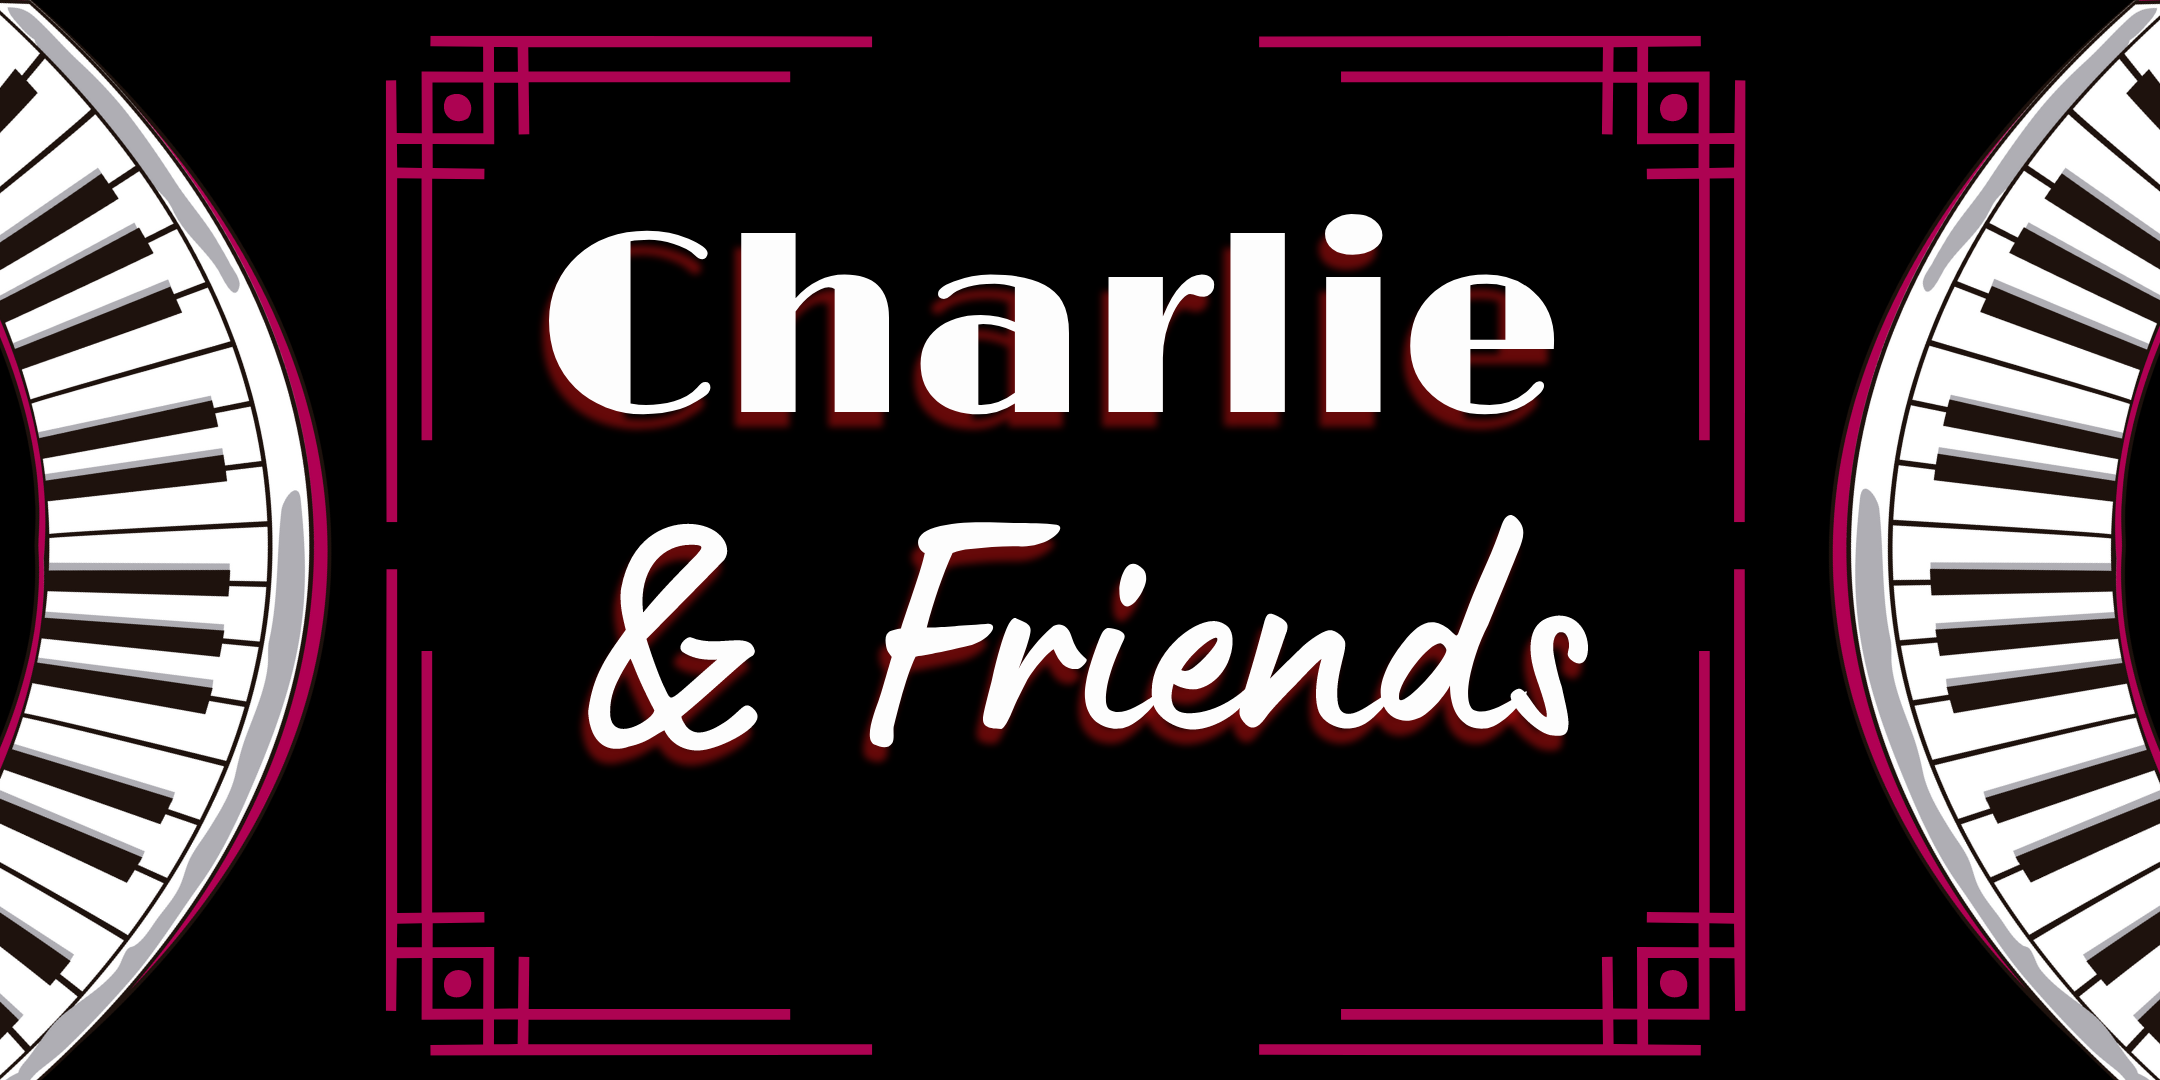 TEXT: "Charlie and Friends" with red corners framing title and piano keyboards on the left and right